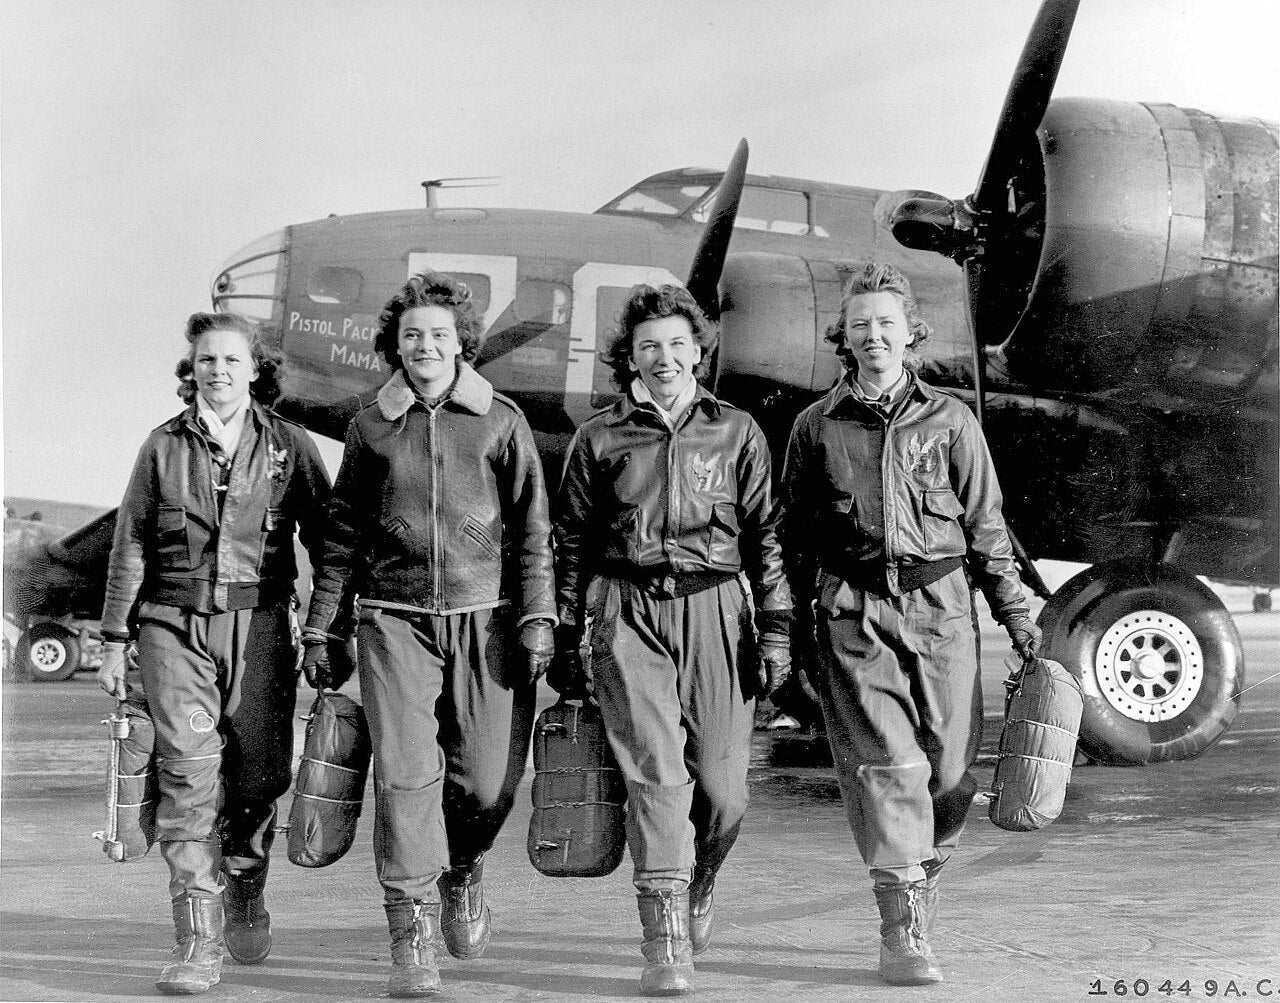 Women Airforce Service Pilots (WASPs) Frances Green, Margaret (Peg) Kirchner, Ann Waldner and Blanche Osborn (left to right) leaving their B-17 Flying Fortresses, Pistol Packin' Mama, at the four engine school at Lockbourne AAF, Ohio. [Photo: U.S. Air Force]